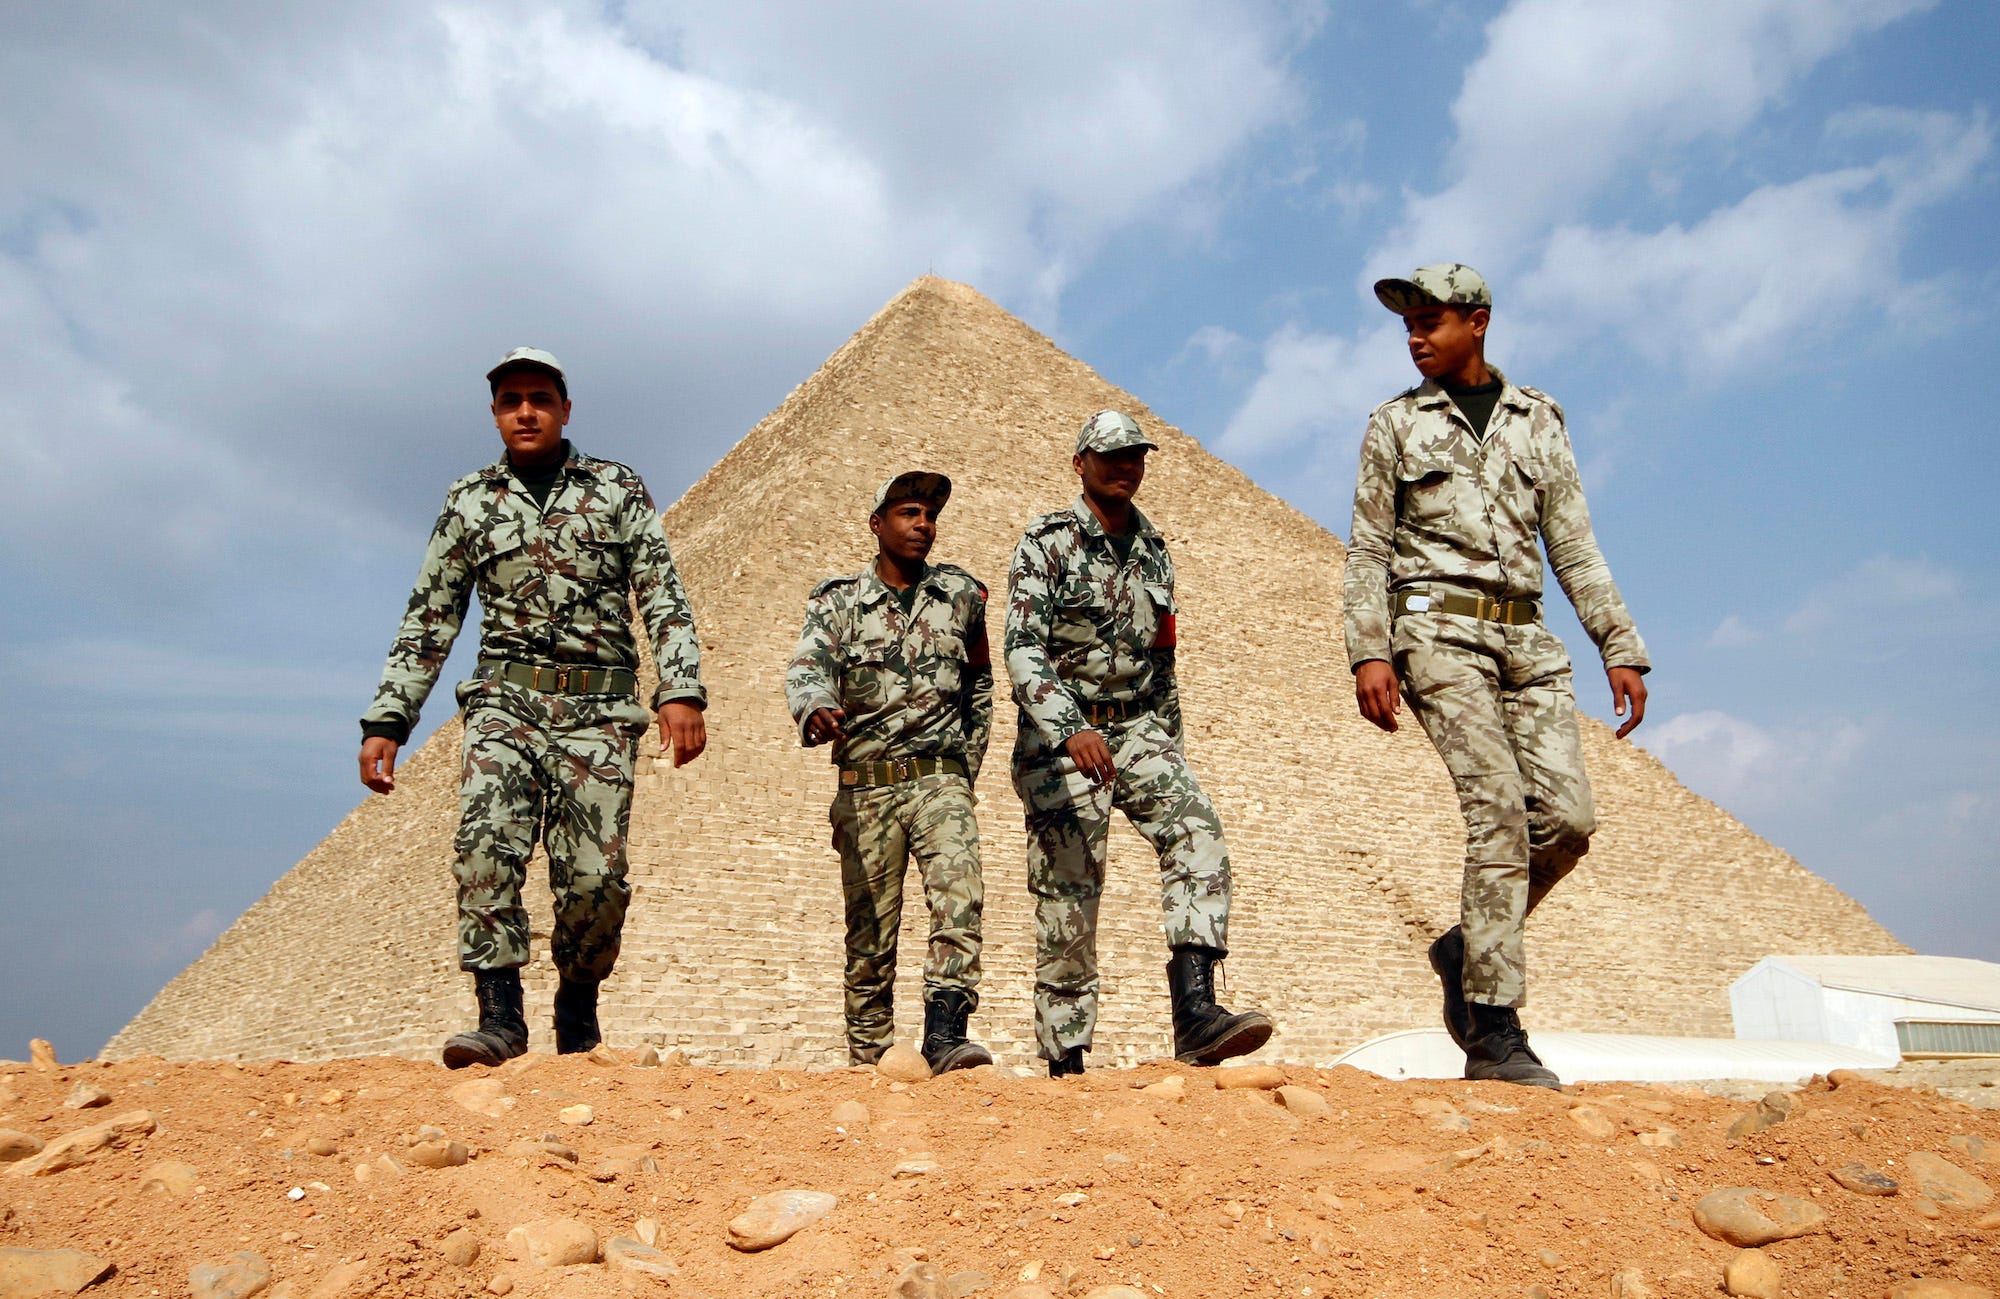 Egyptian soldiers walk in front of the Great Giza pyramids on the outskirts of Cairo February 9, 2011.